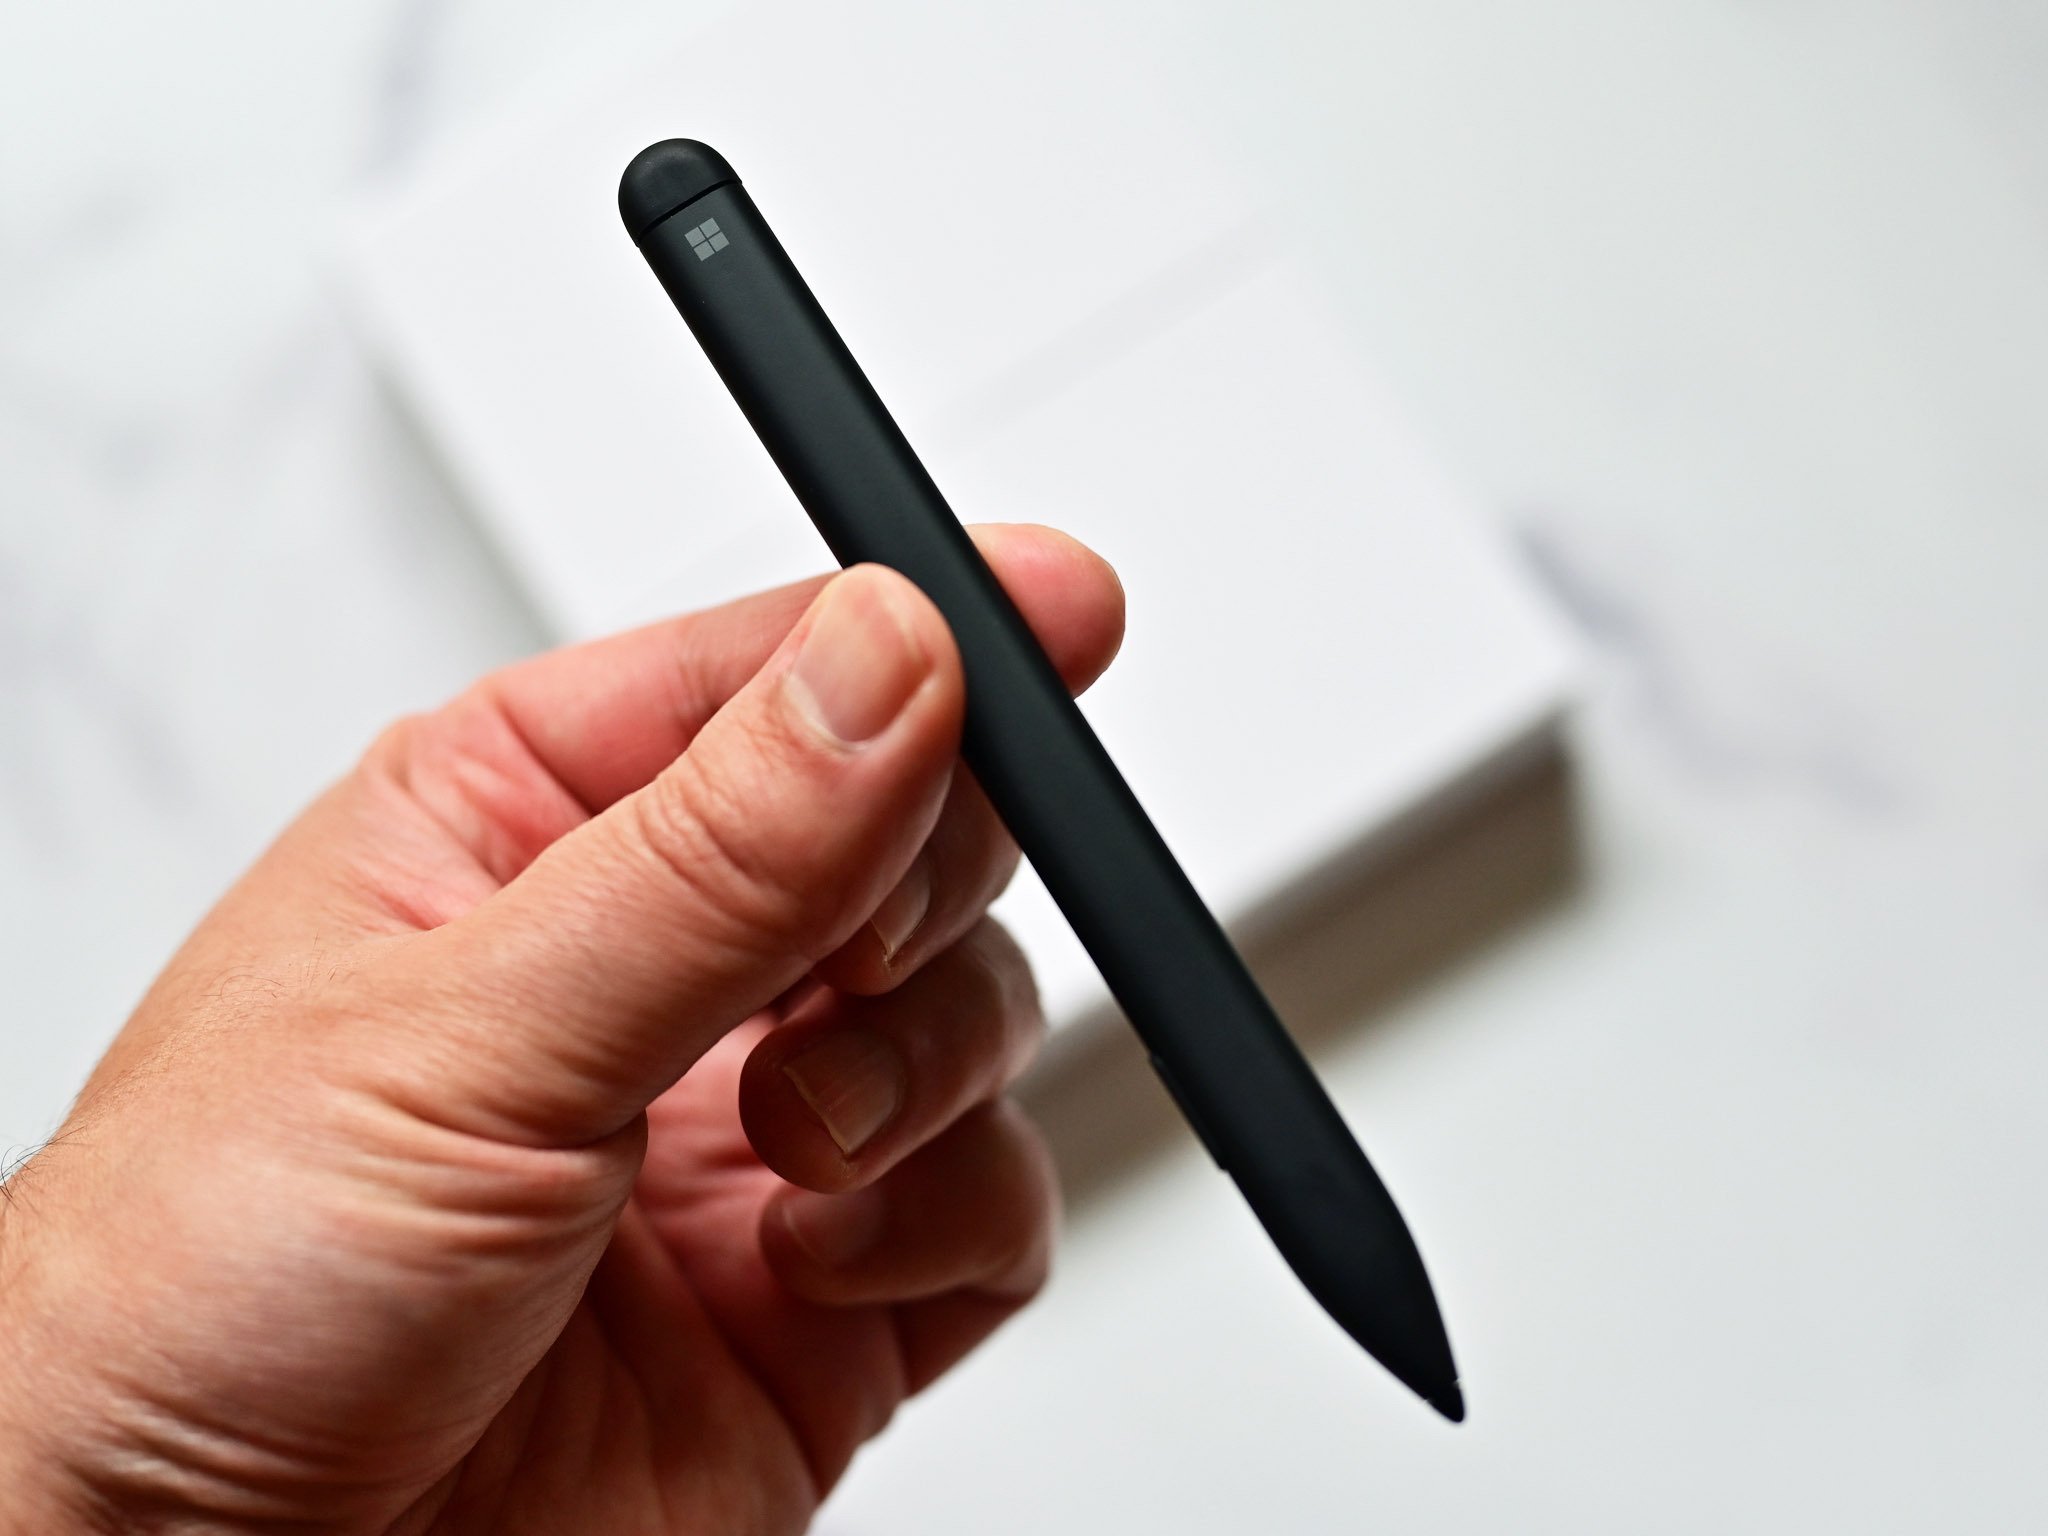 Microsoft Surface Pen - See Compatibility of Stylus